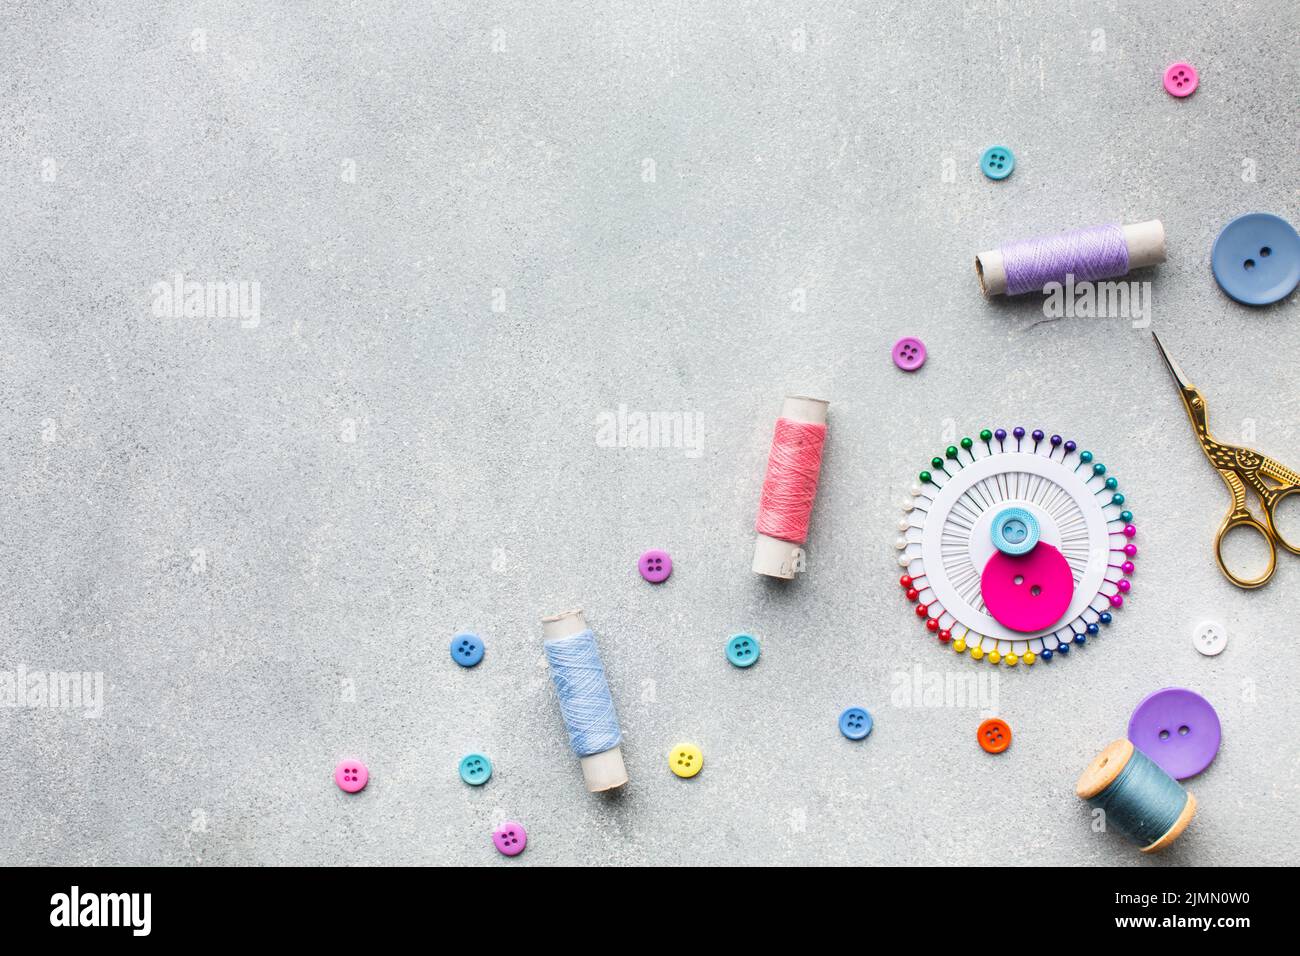 Arrangement colourful sewing threads buttons Stock Photo